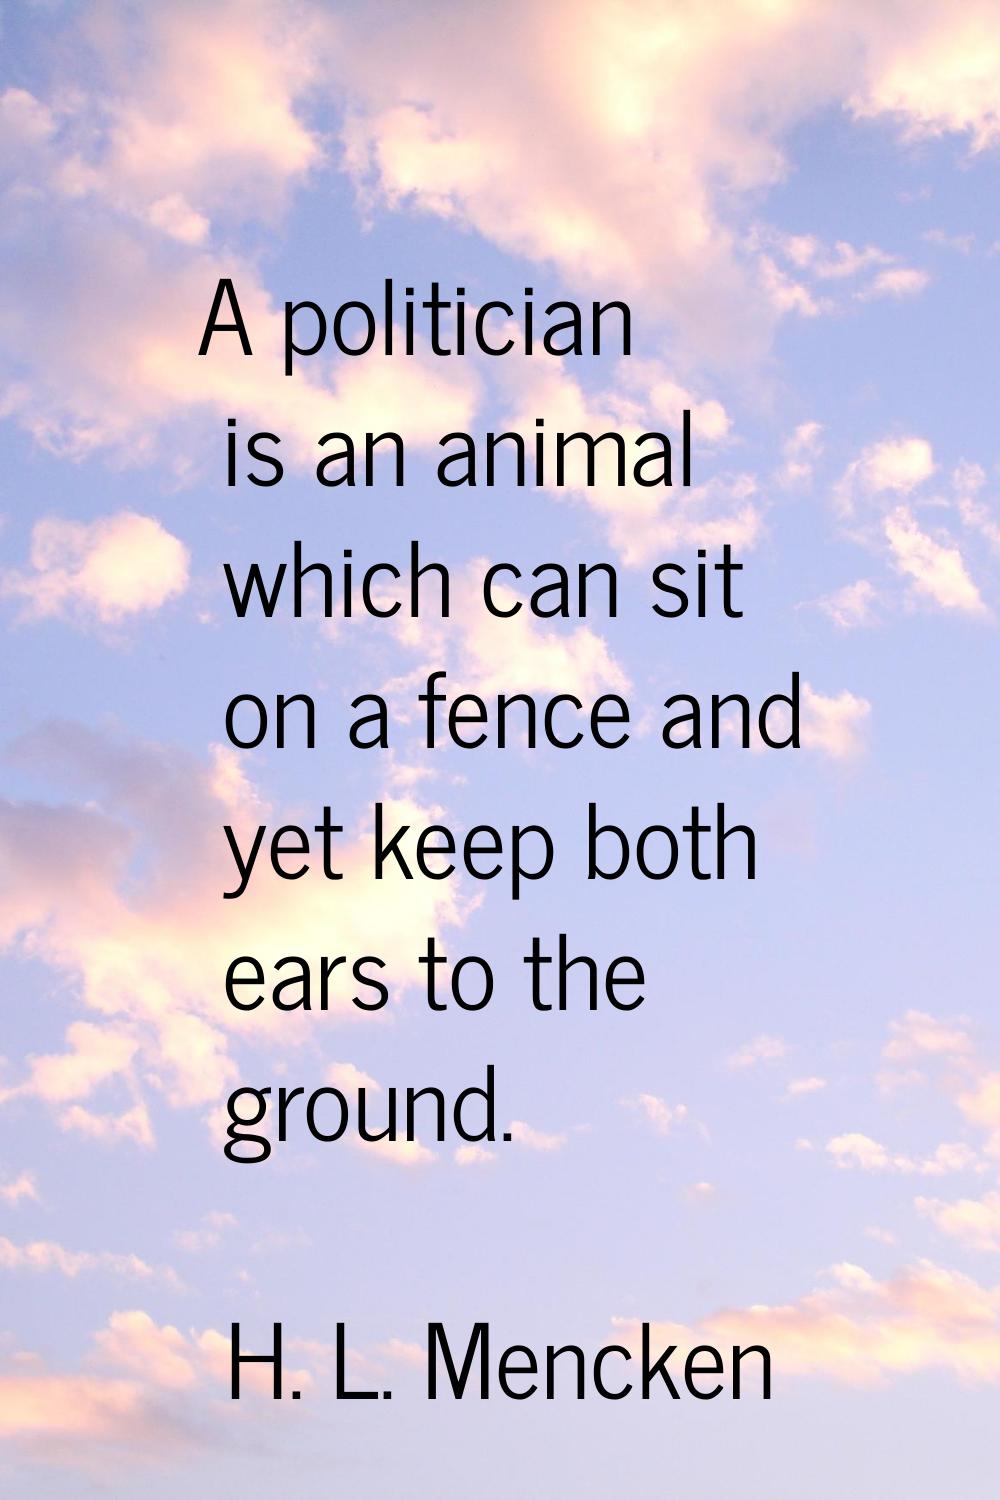 A politician is an animal which can sit on a fence and yet keep both ears to the ground.